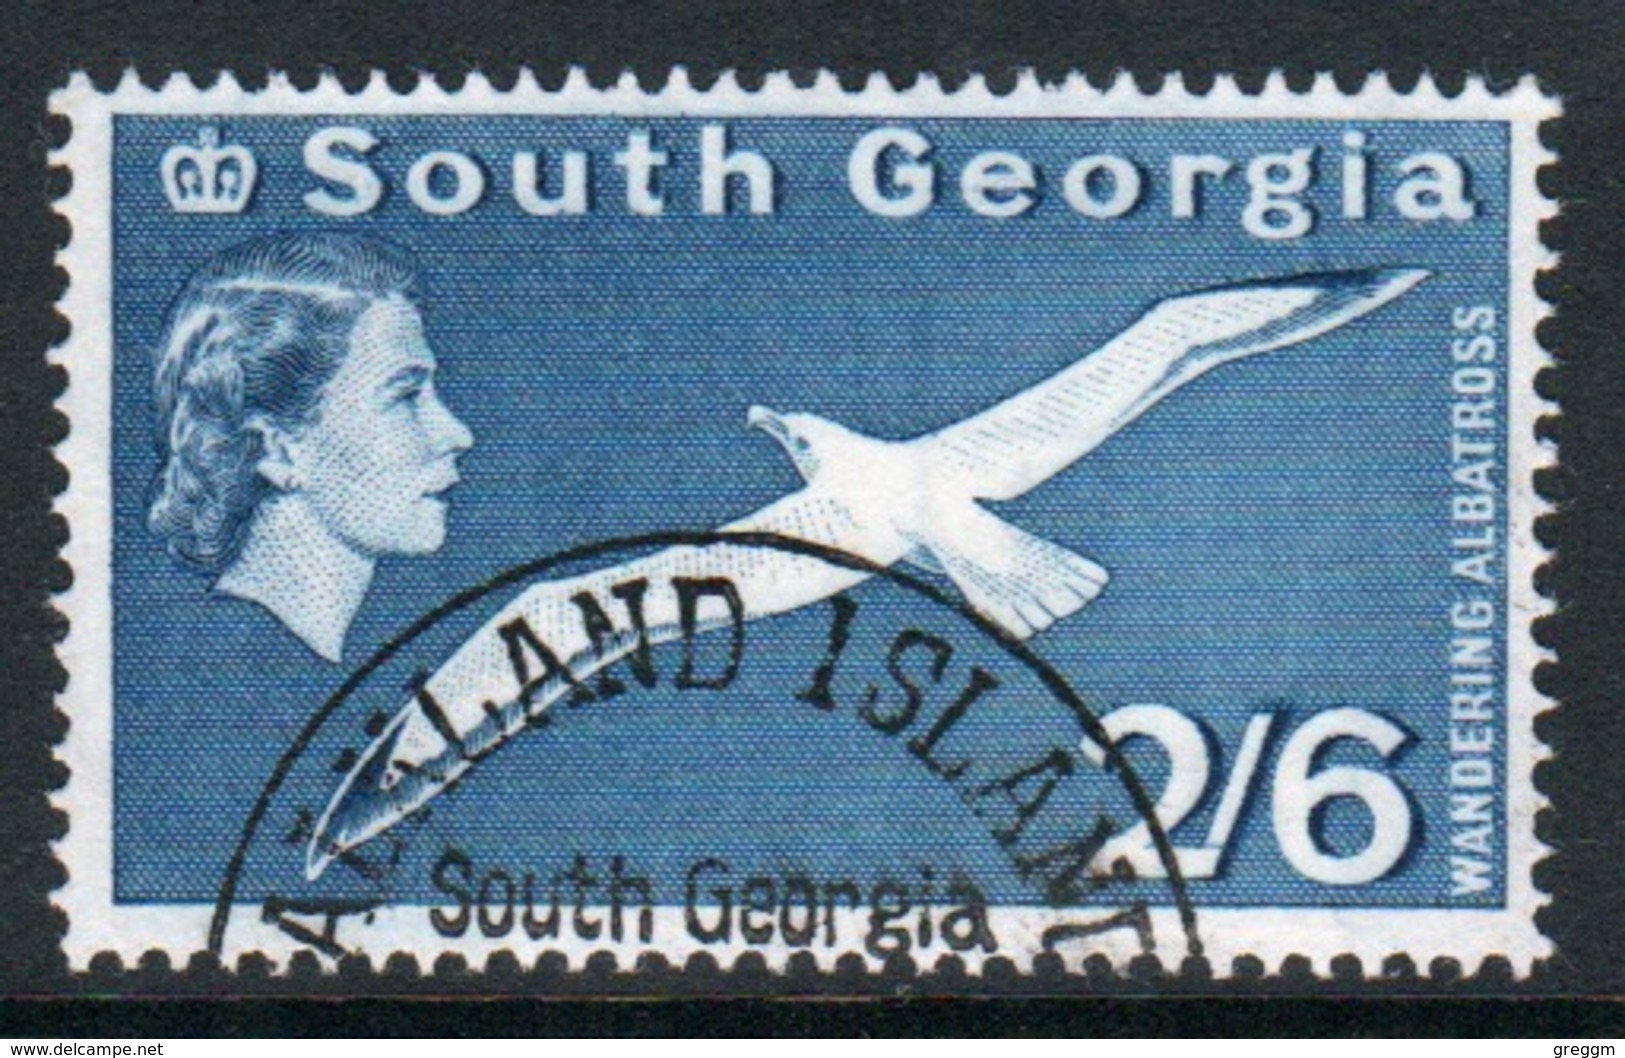 South Georgia 1963 Definitive 2/6d Stamp In Fine Used Condition. - South Georgia